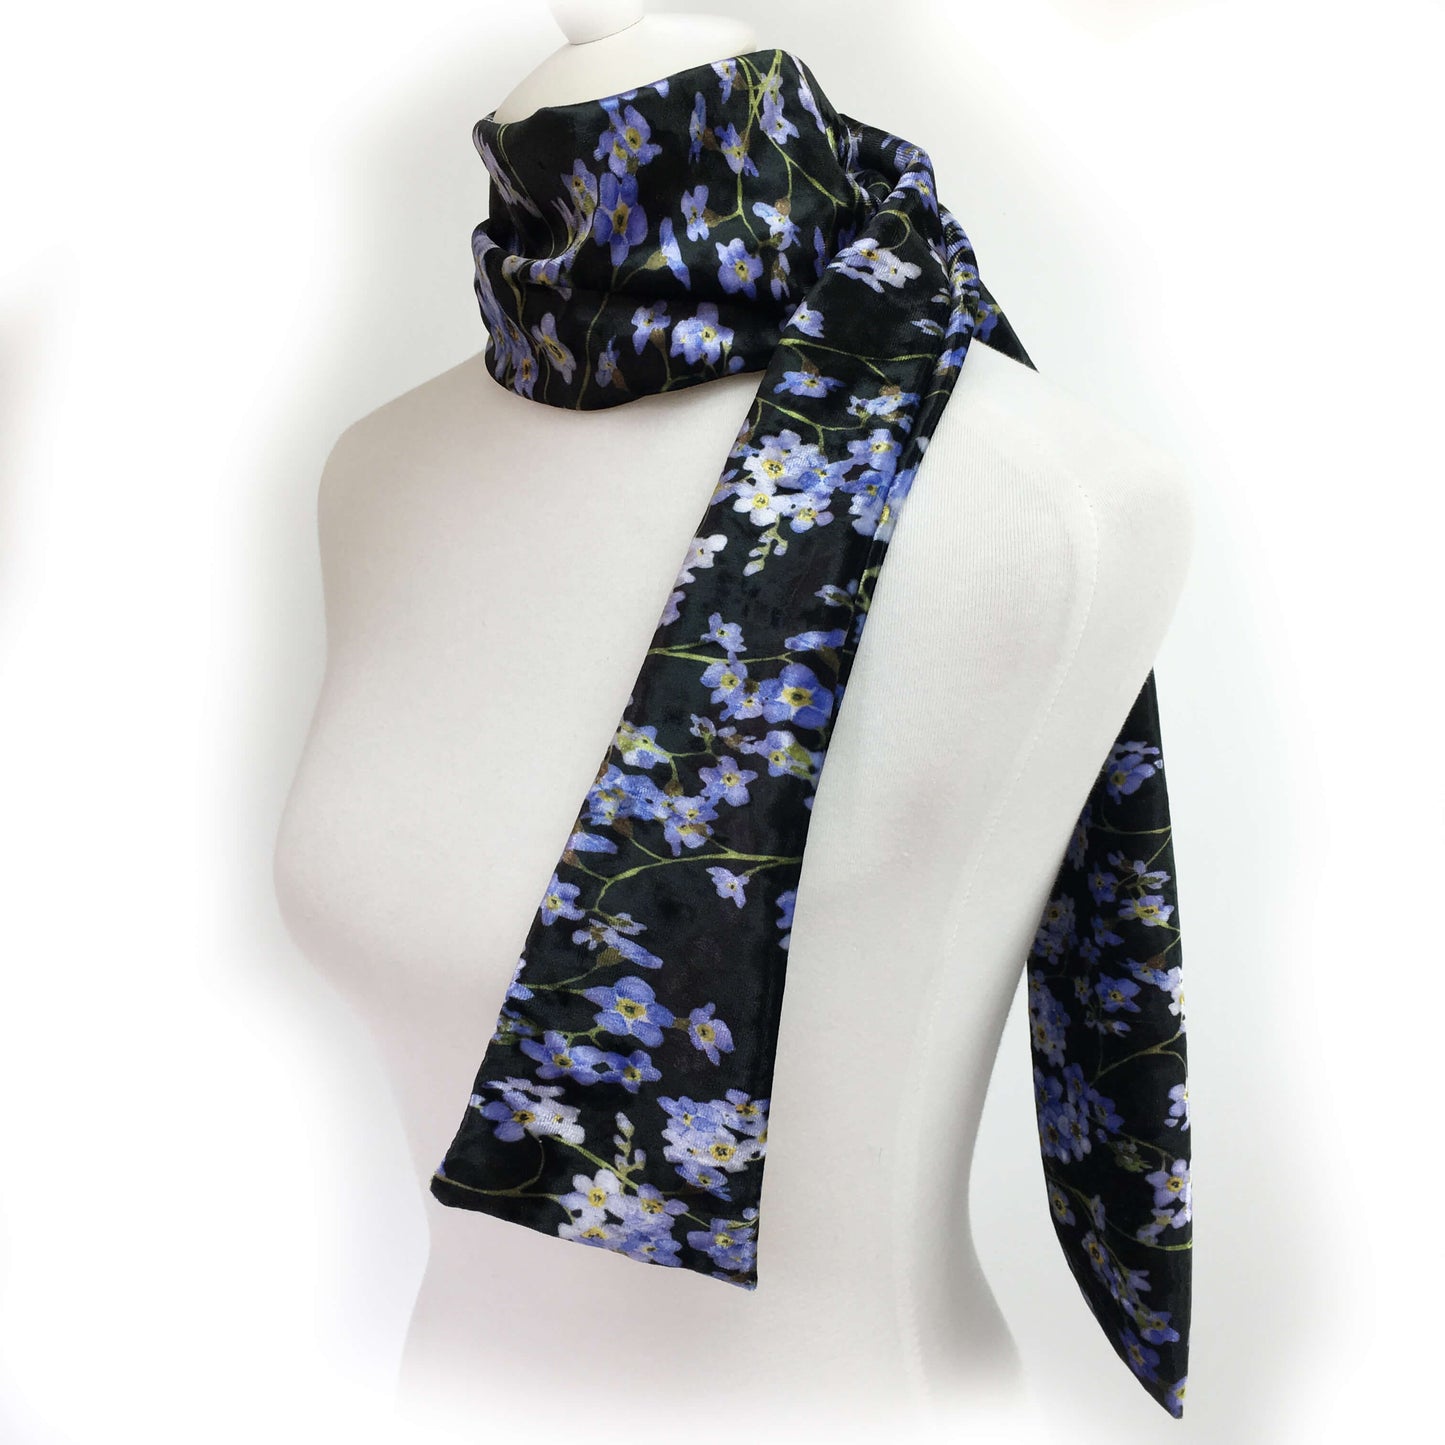 Forget-Me-Not Watercolor Scarf on Black - All season velour - UndertheLeafDesigns.com